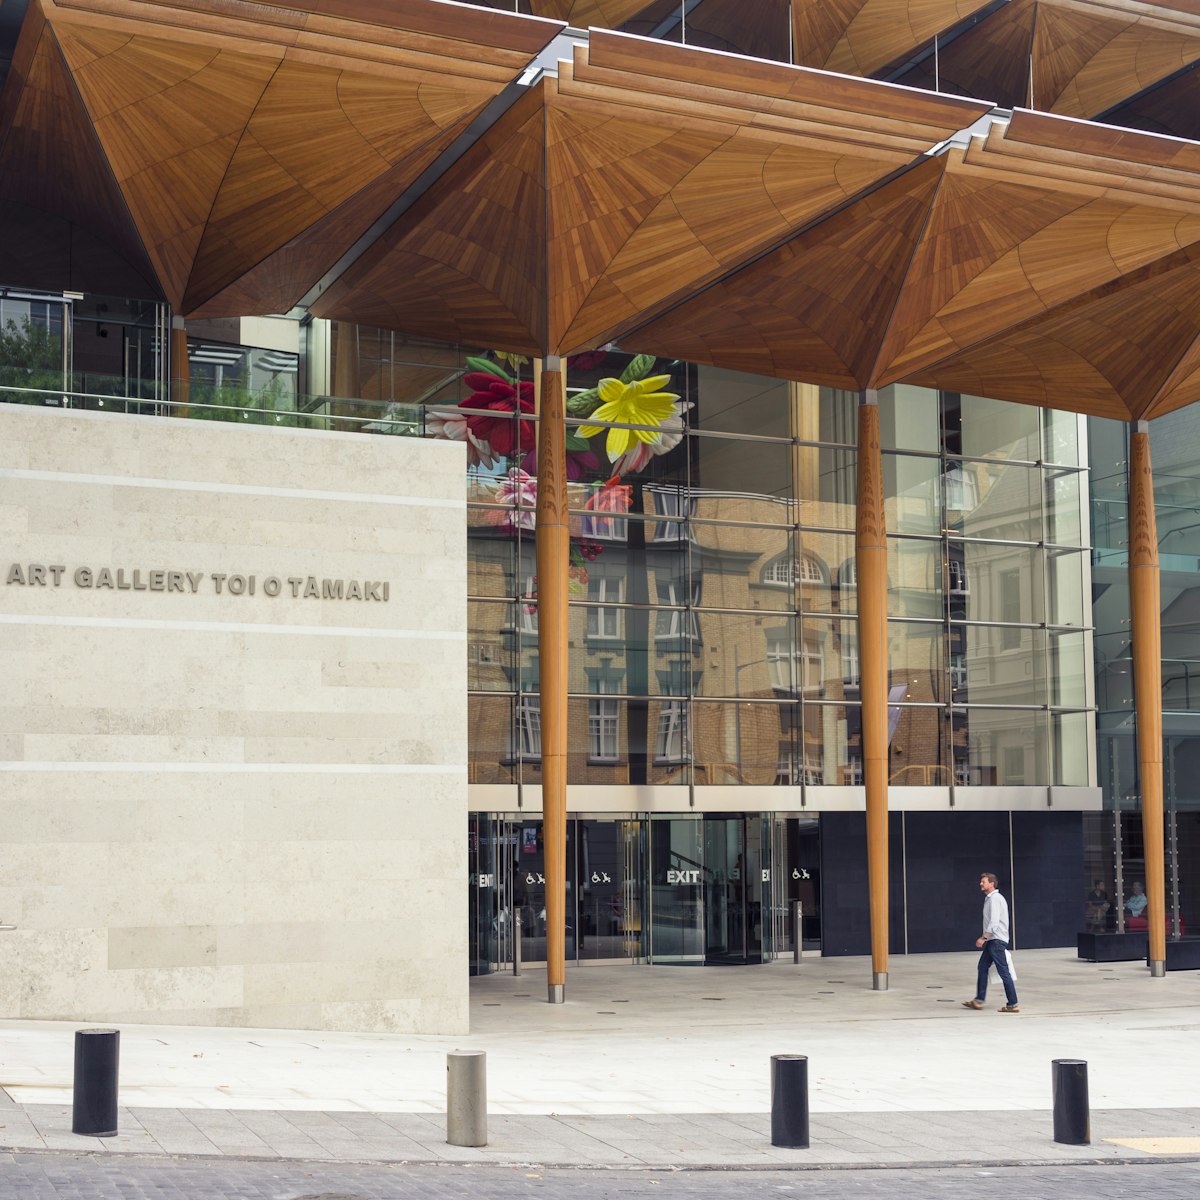 The entrance of the Auckland Art Gallery (or Toi o Tāmaki in Māori), located below Albert Park in the city centre.